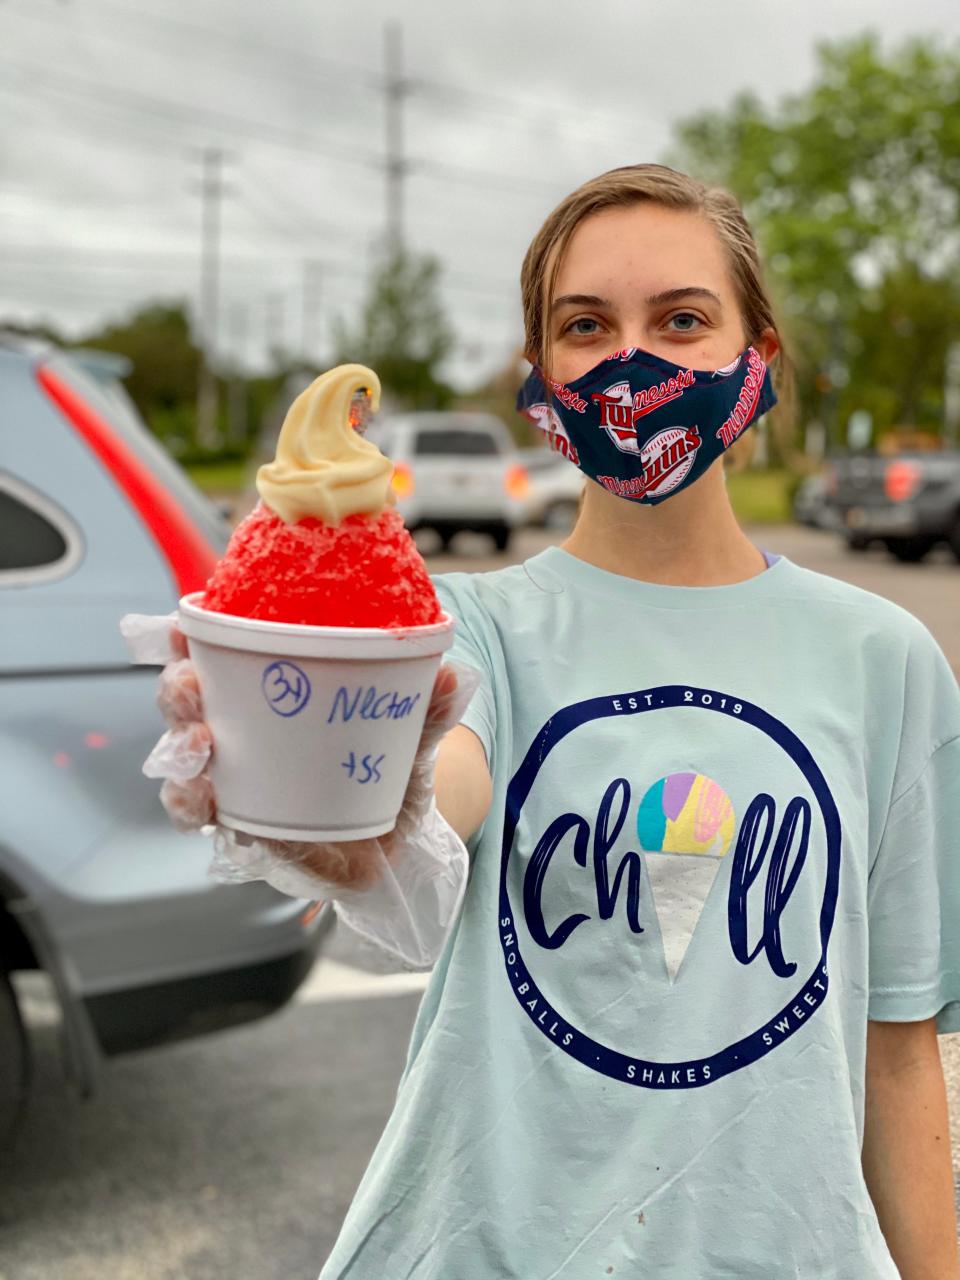 Chill Frozen Treats & Sweets employee Taryn Miskowiec delivers a sno-ball to a car on May 26, 2020.